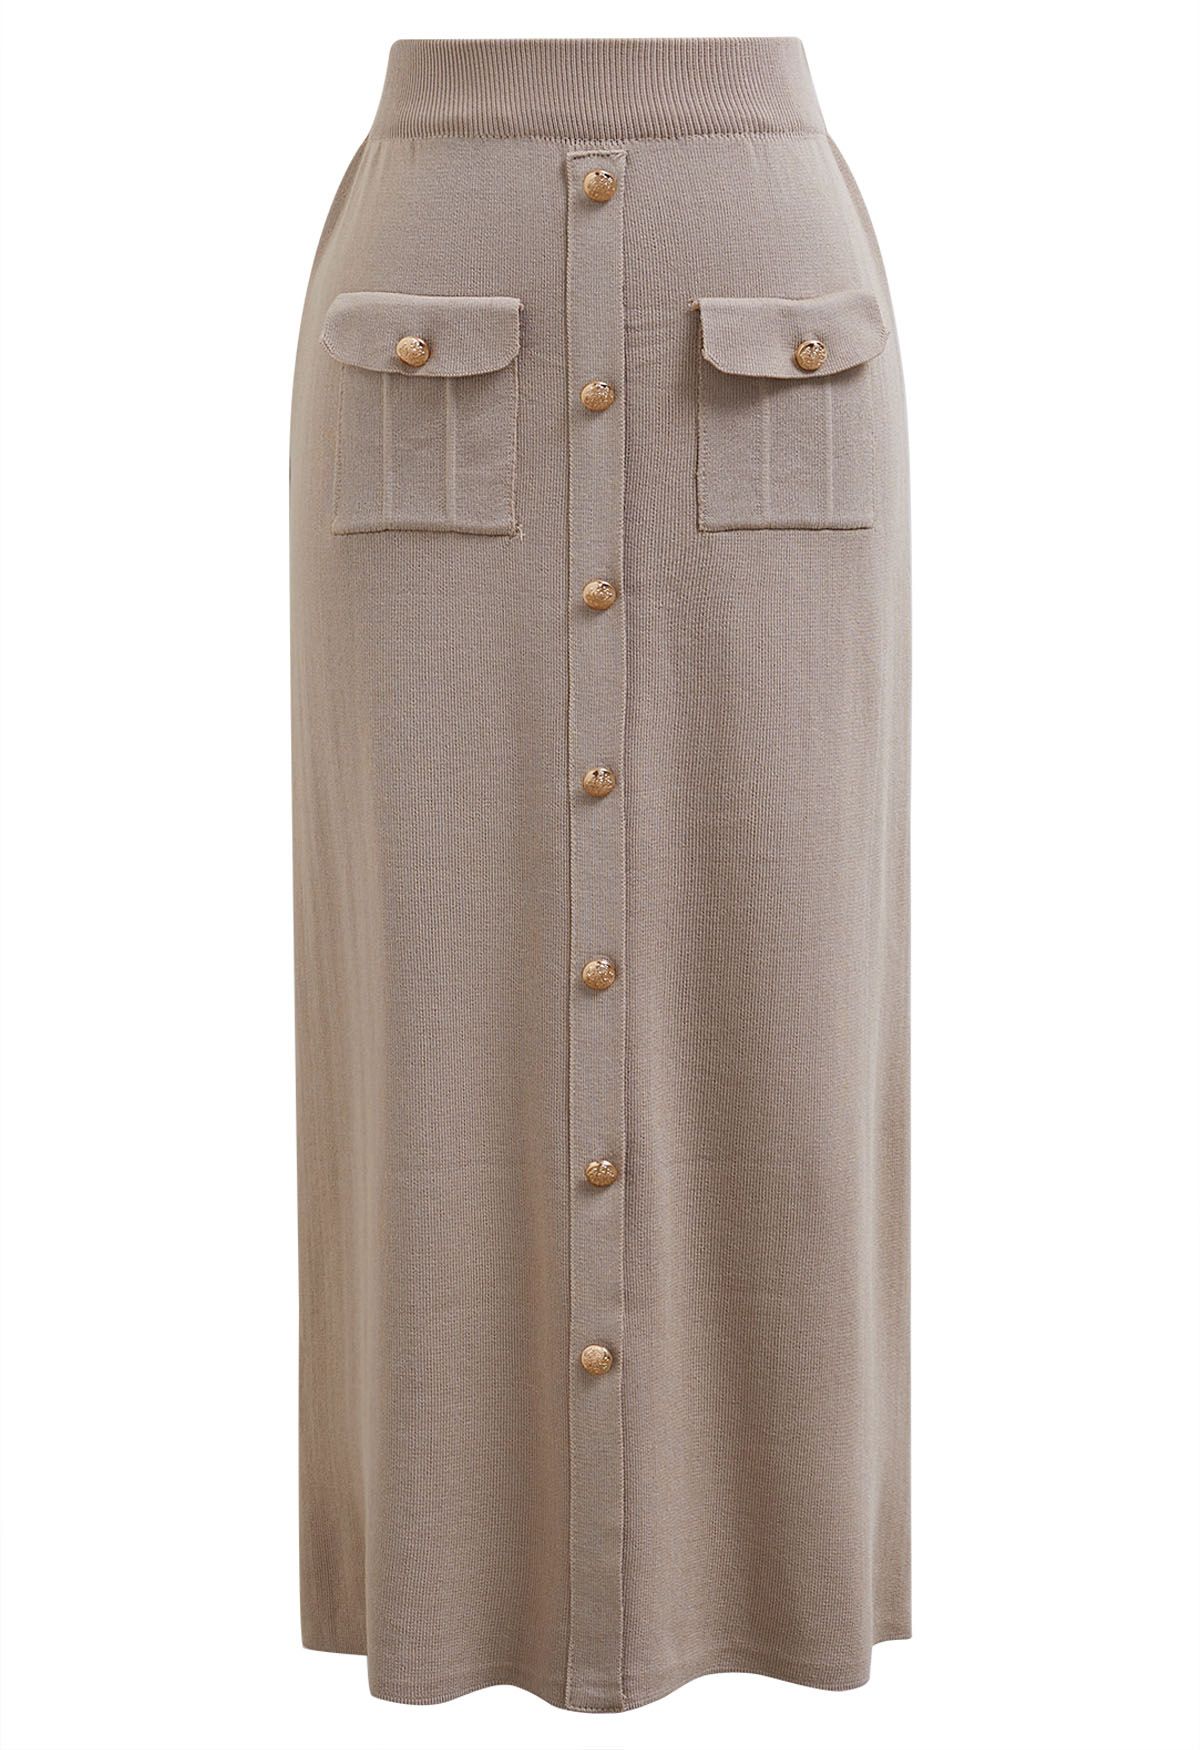 Standout Button Embellished Knit Top and Midi Skirt Set in Taupe